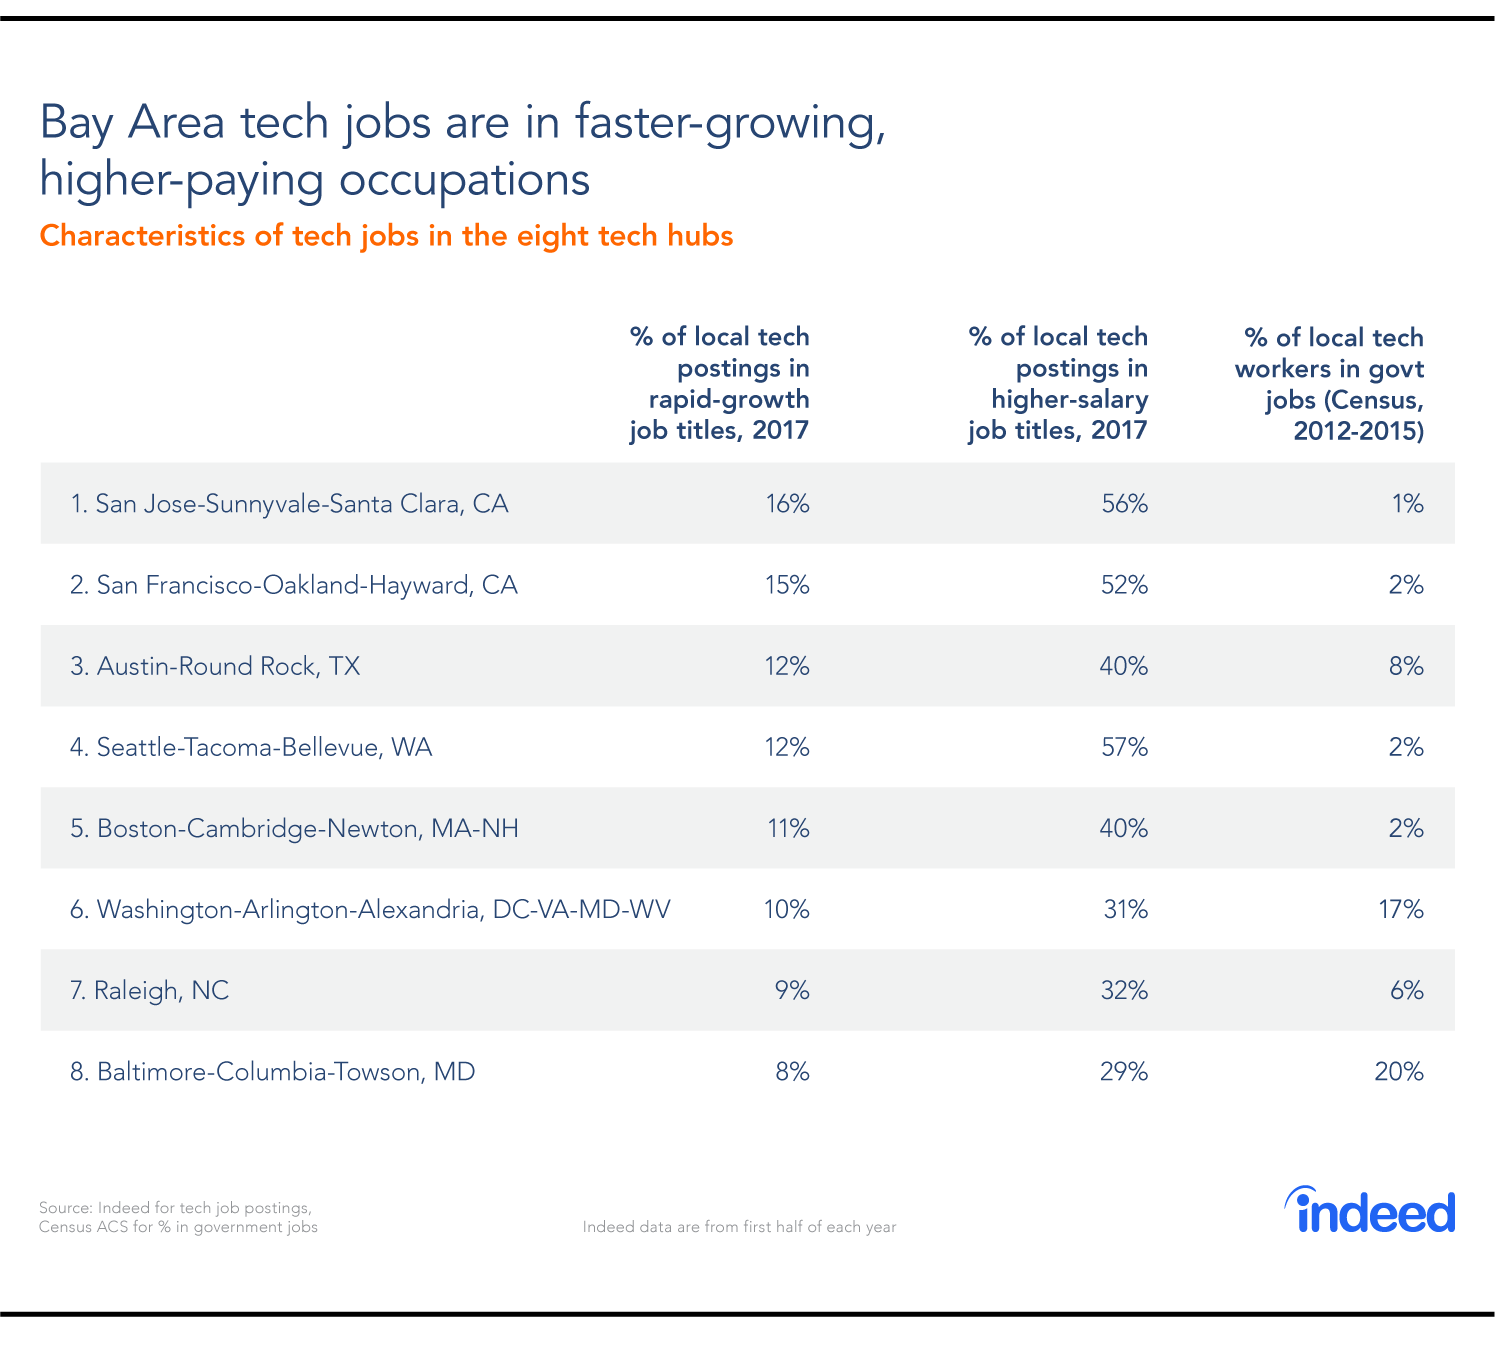 Bay Area tech jobs are in faster-growing, higher-paying occupations